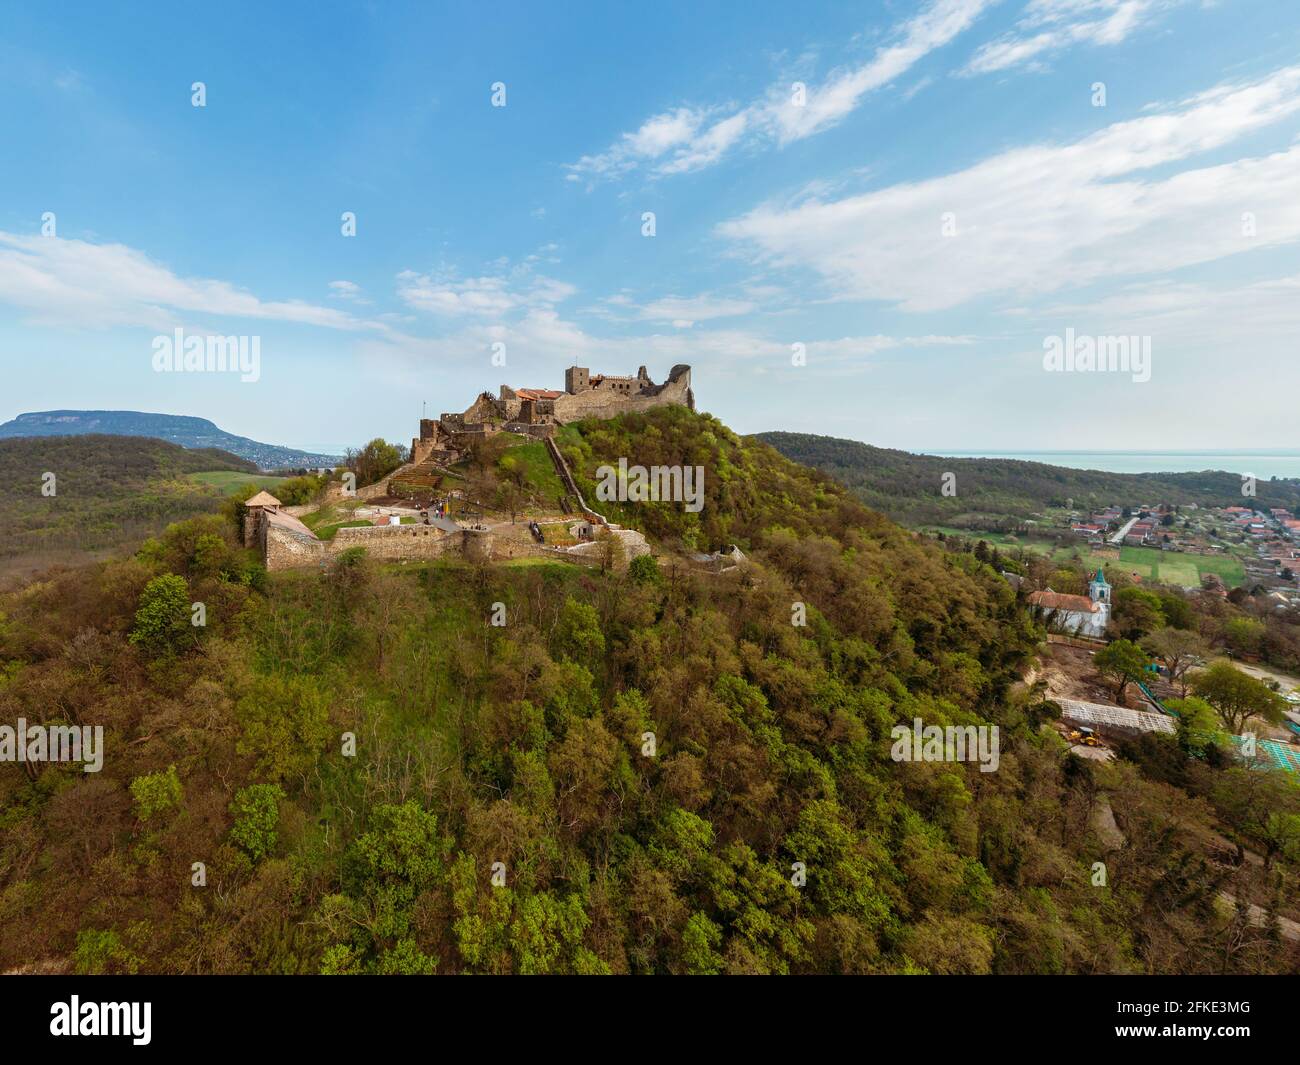 The Castle of Szigliget with Badacsony mountain next to lake Balaton in Hungary. Hisorical monument fortress ruins. Built was in 11 century, destroyed Stock Photo